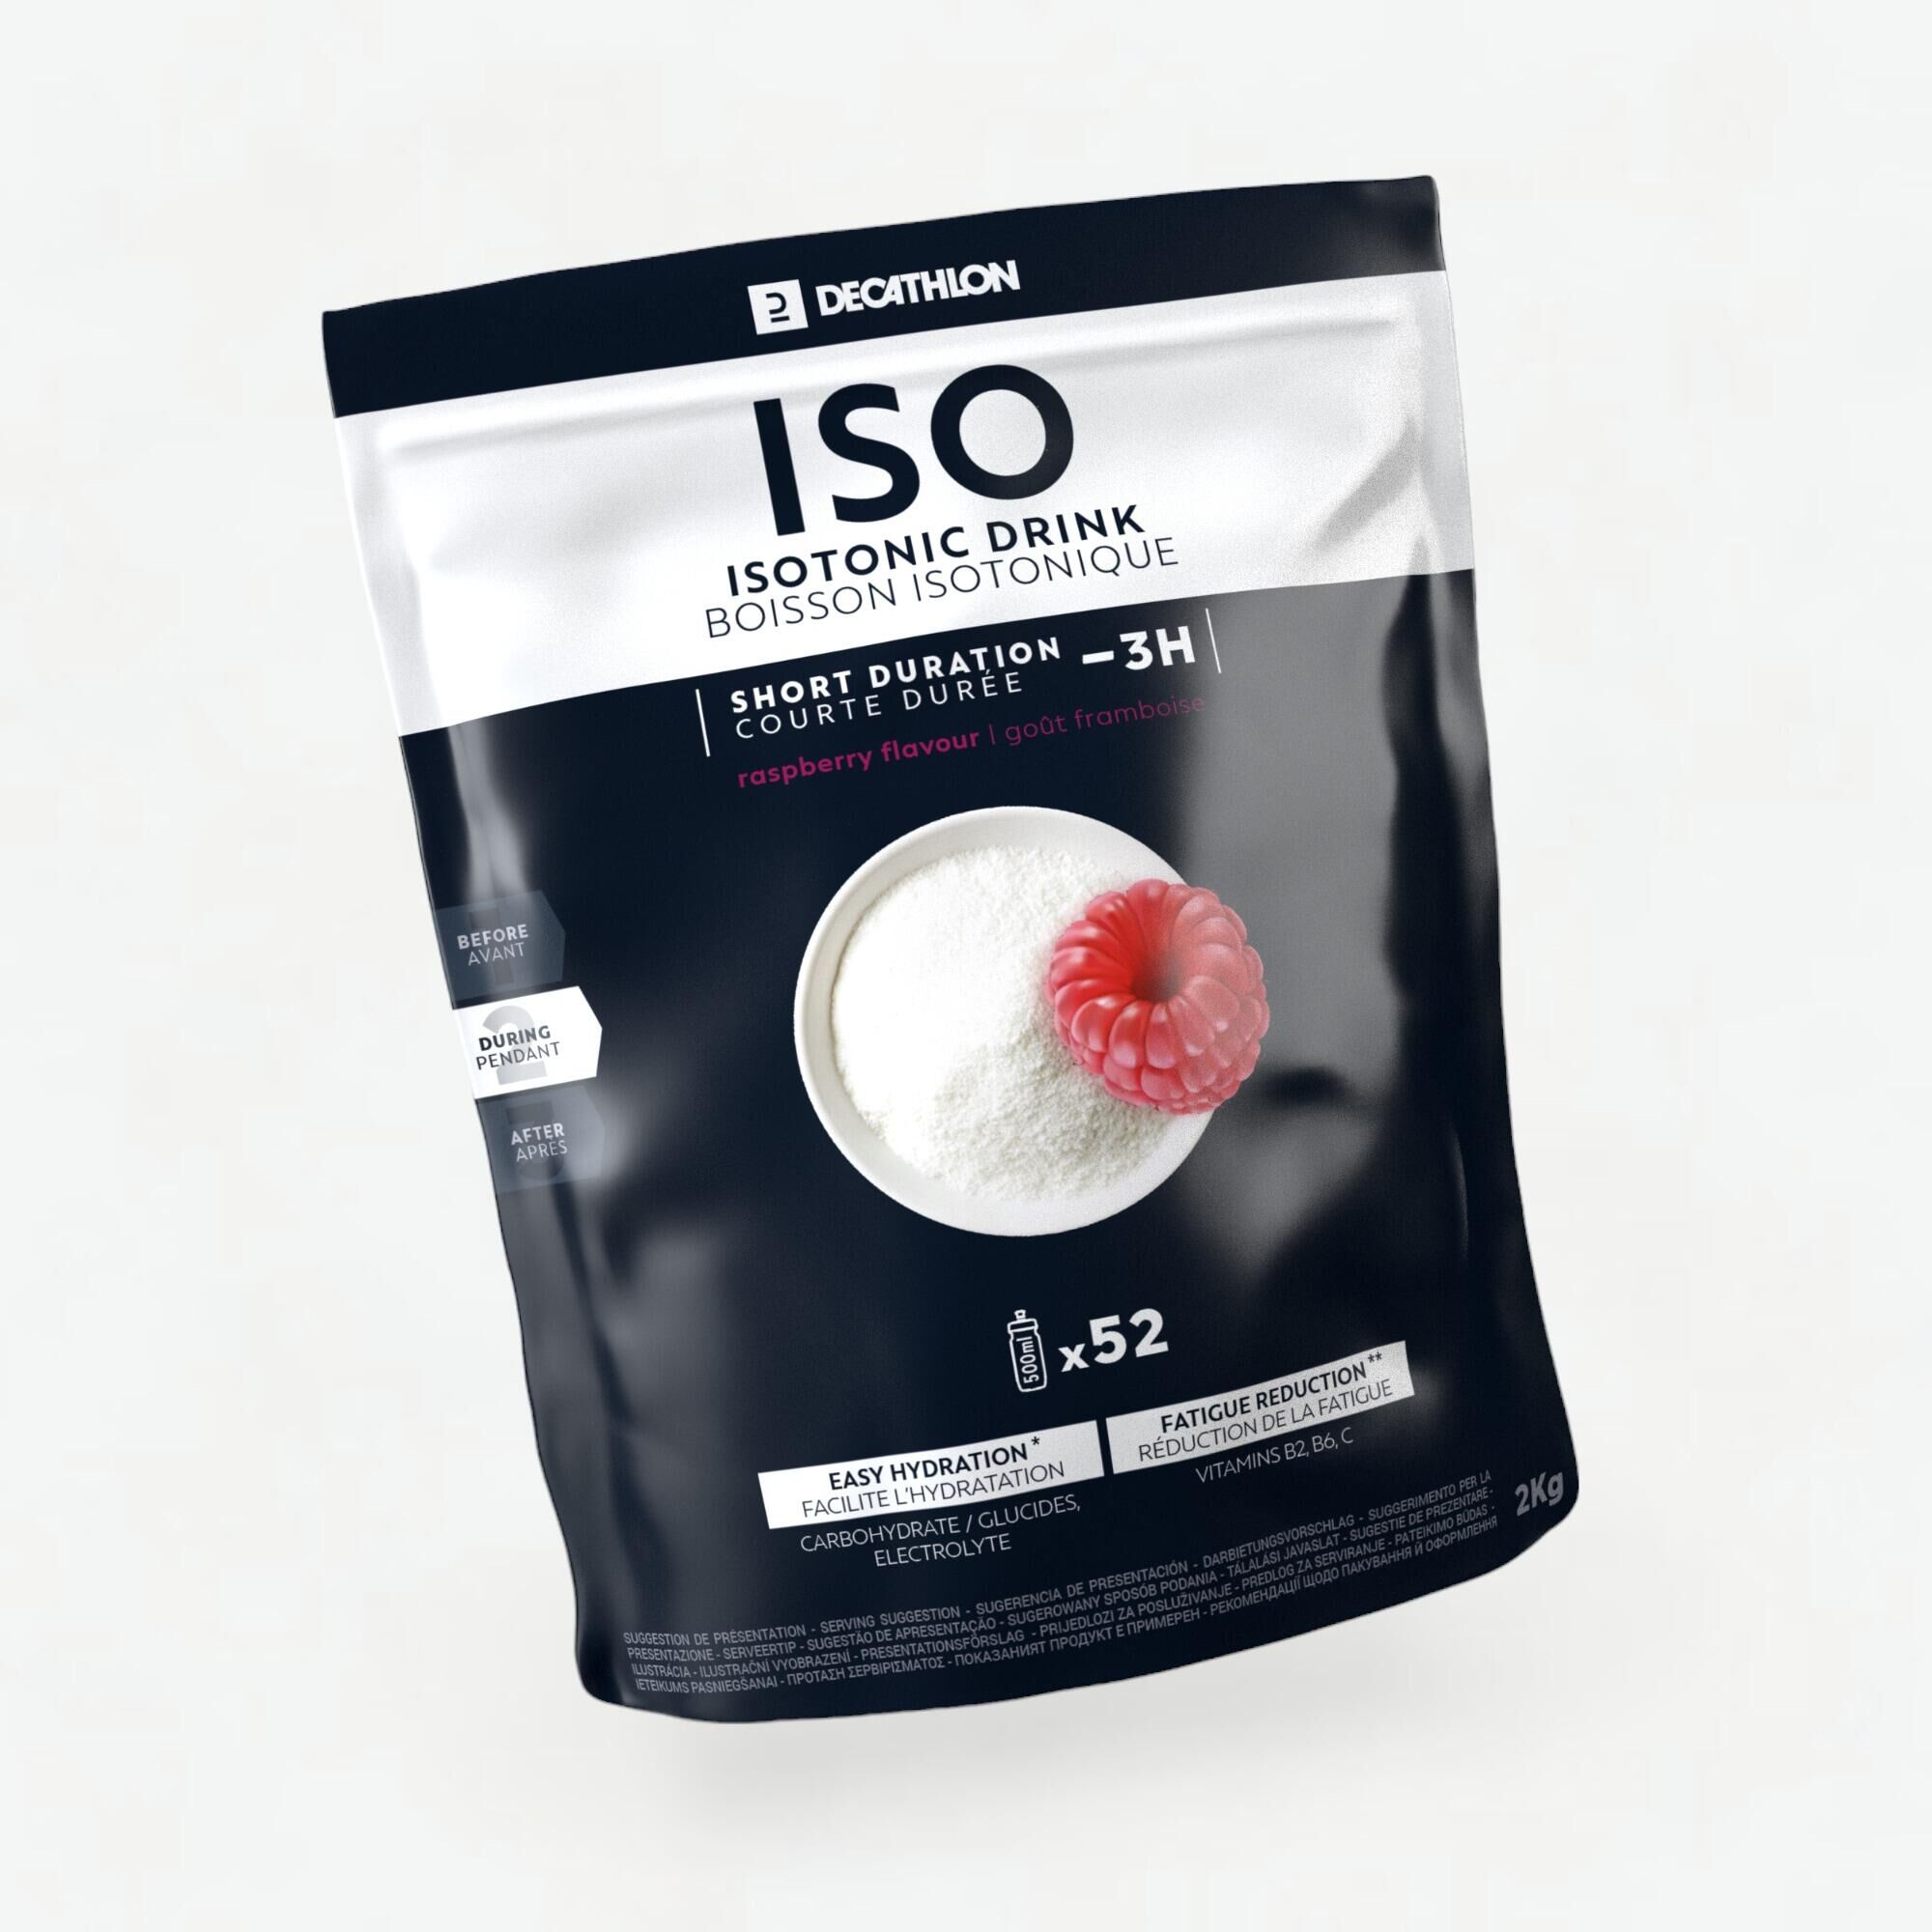 DECATHLON Iso Isotonic Drink Powder 2kg - Mixed Berries